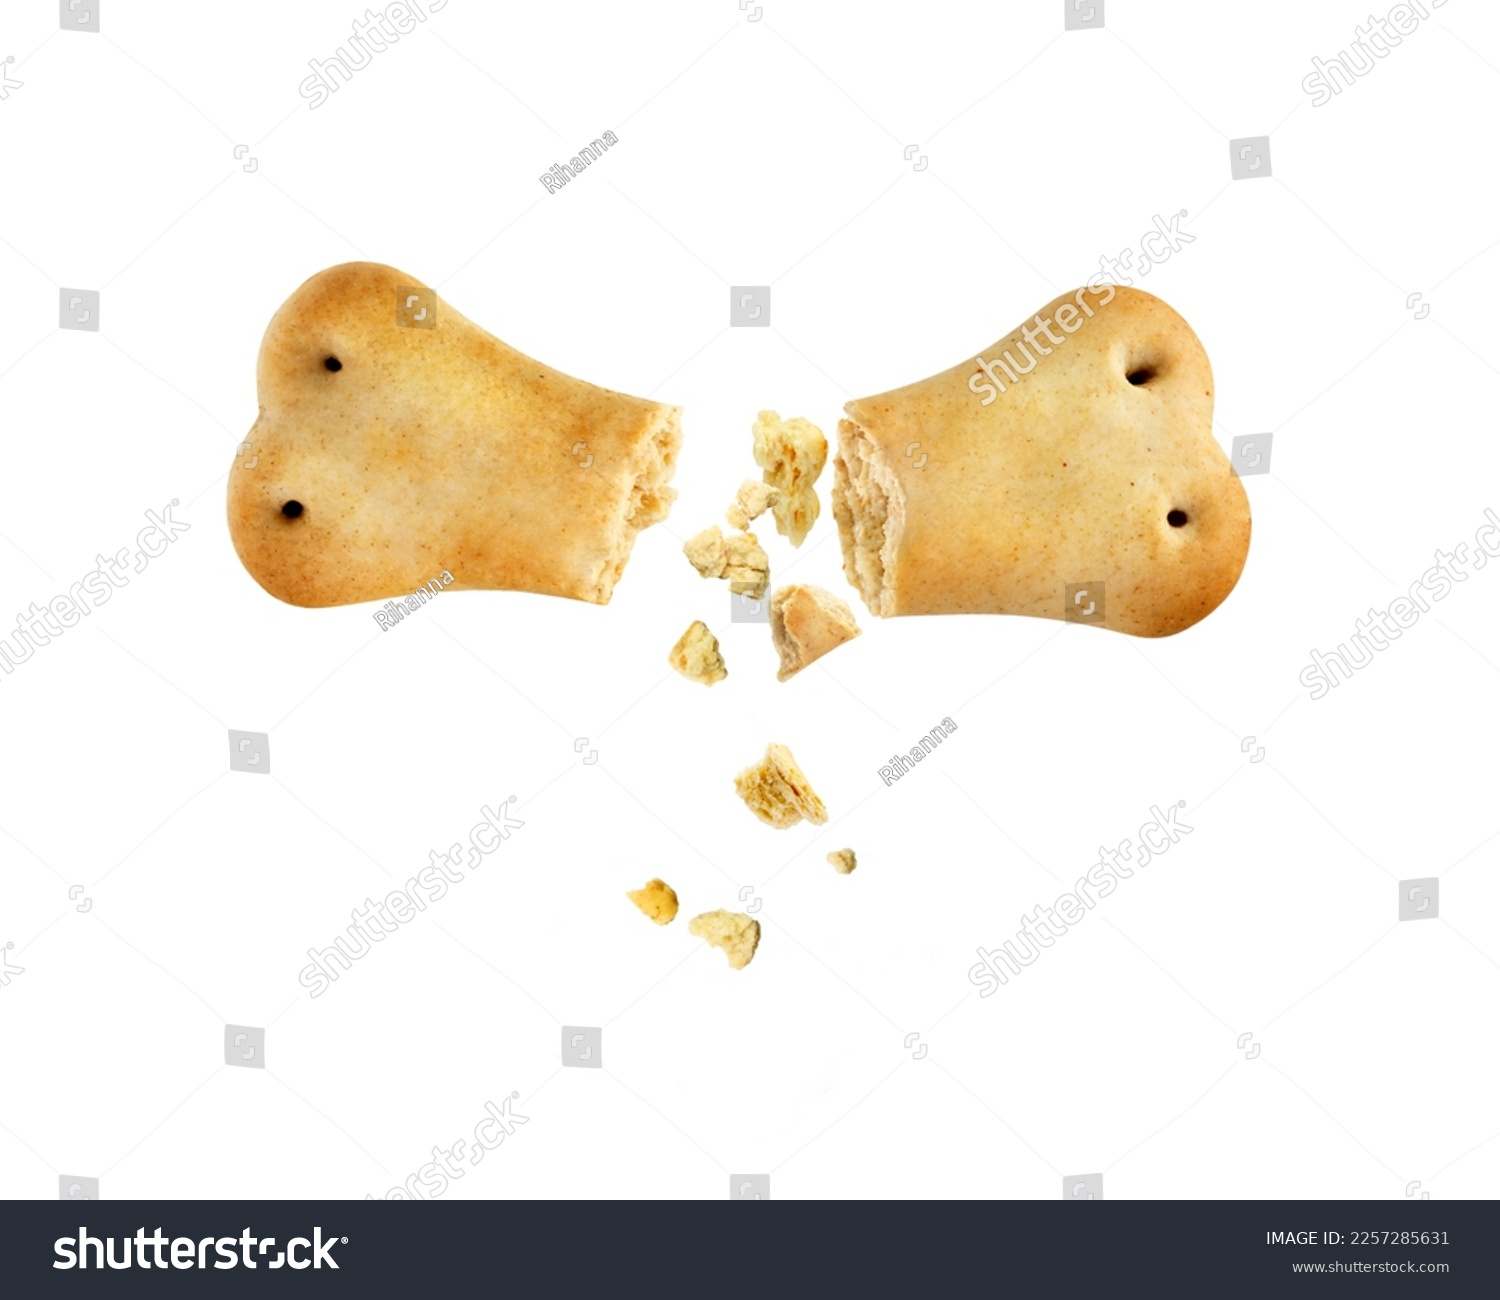 Broken dog biscuit isolated on white background #2257285631